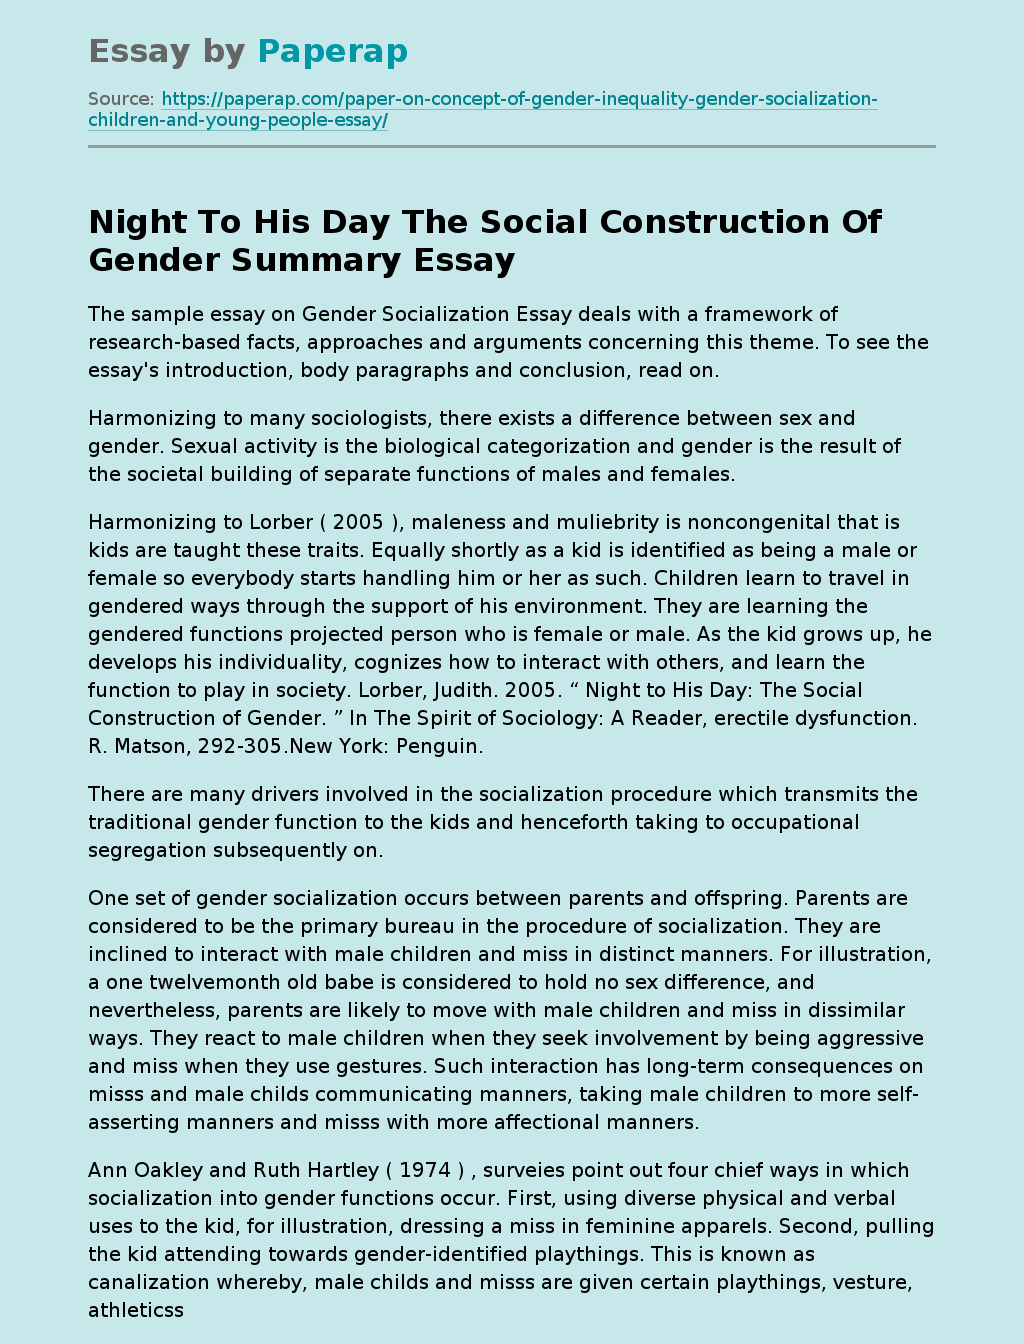 Night To His Day The Social Construction Of Gender Summary